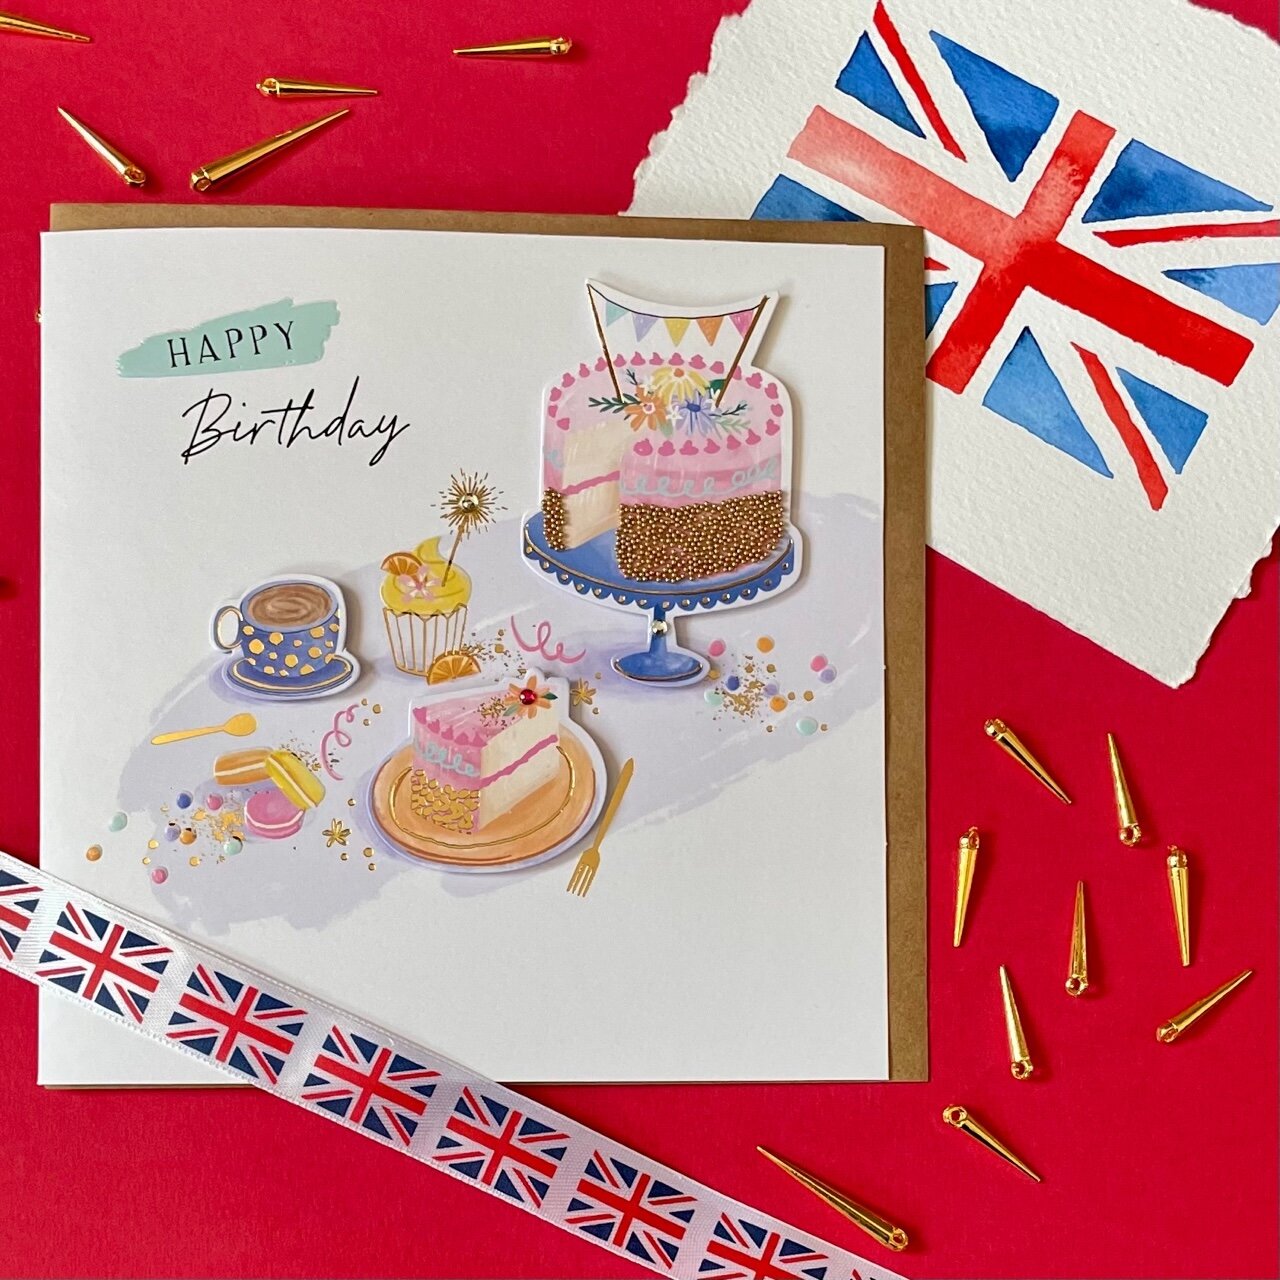 Have a wonderful Bank Holiday weekend, everyone! May your celebrations be fit for King (with lots of tea and cake!) #coronationcelebrations
.
.
.
.
.
#Coronation #CoronationDay #CoronationWeekend #LongLiveTheKing #RoyalCelebrations #TeaandCake #LongW